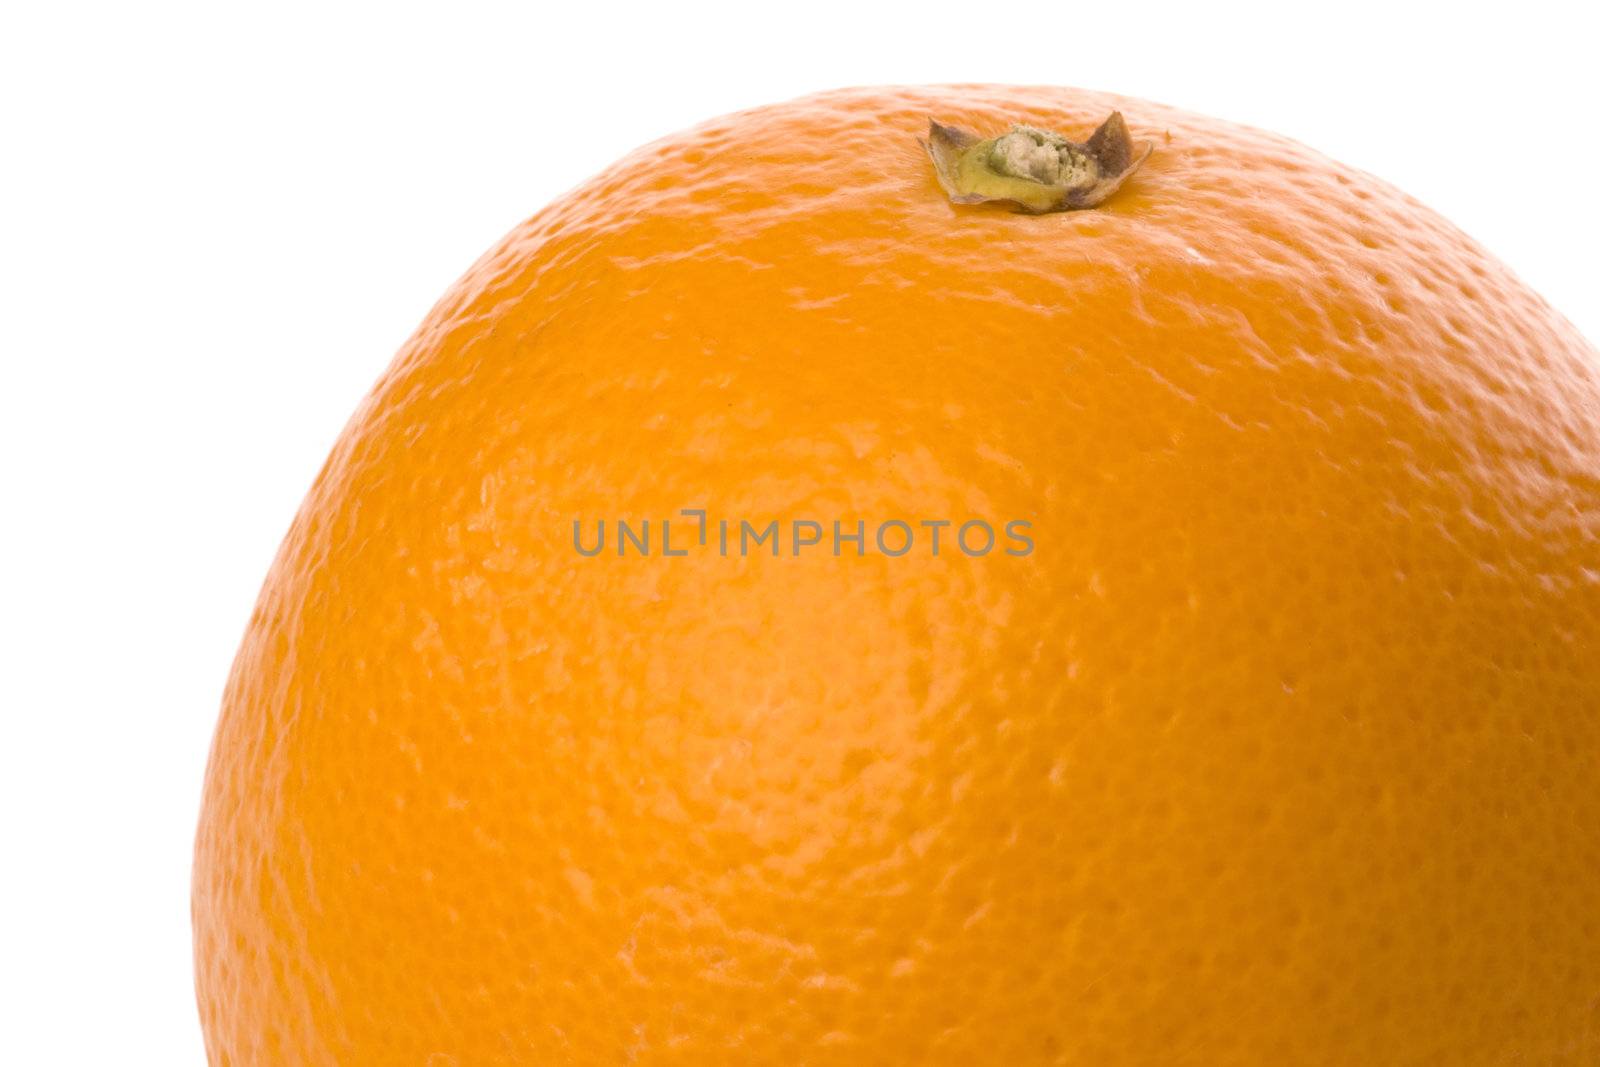 Isolated macro image of an orange against a completely white background.